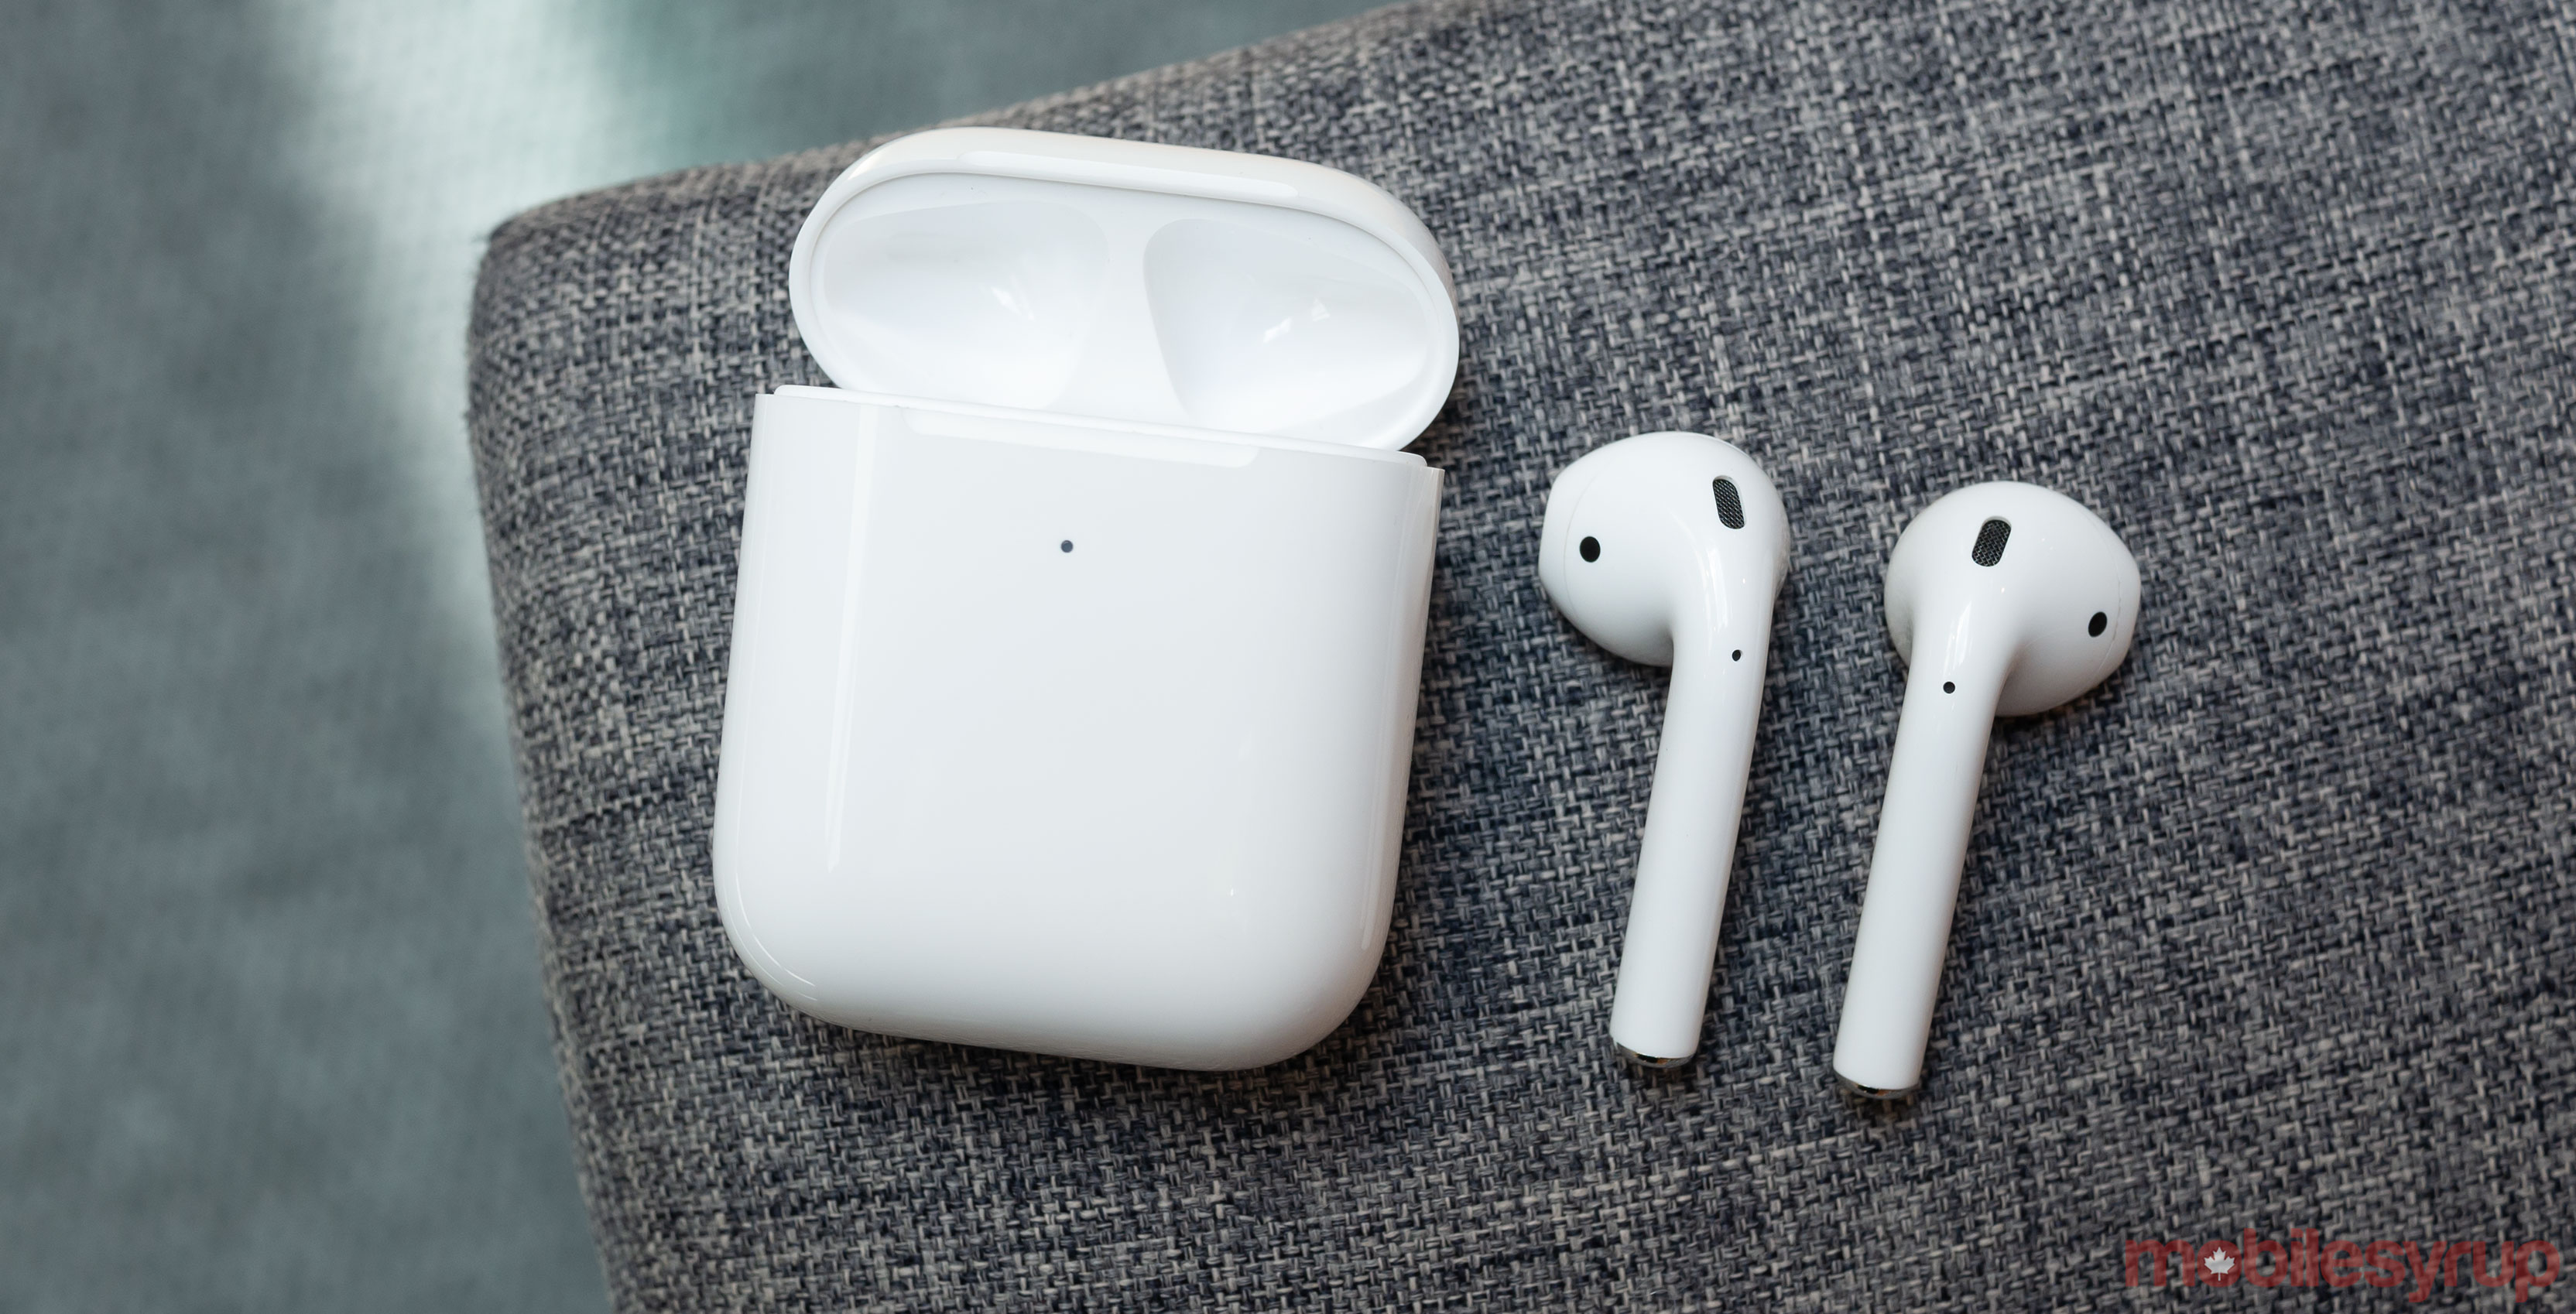 Apple's reportedly include AirPods in the box